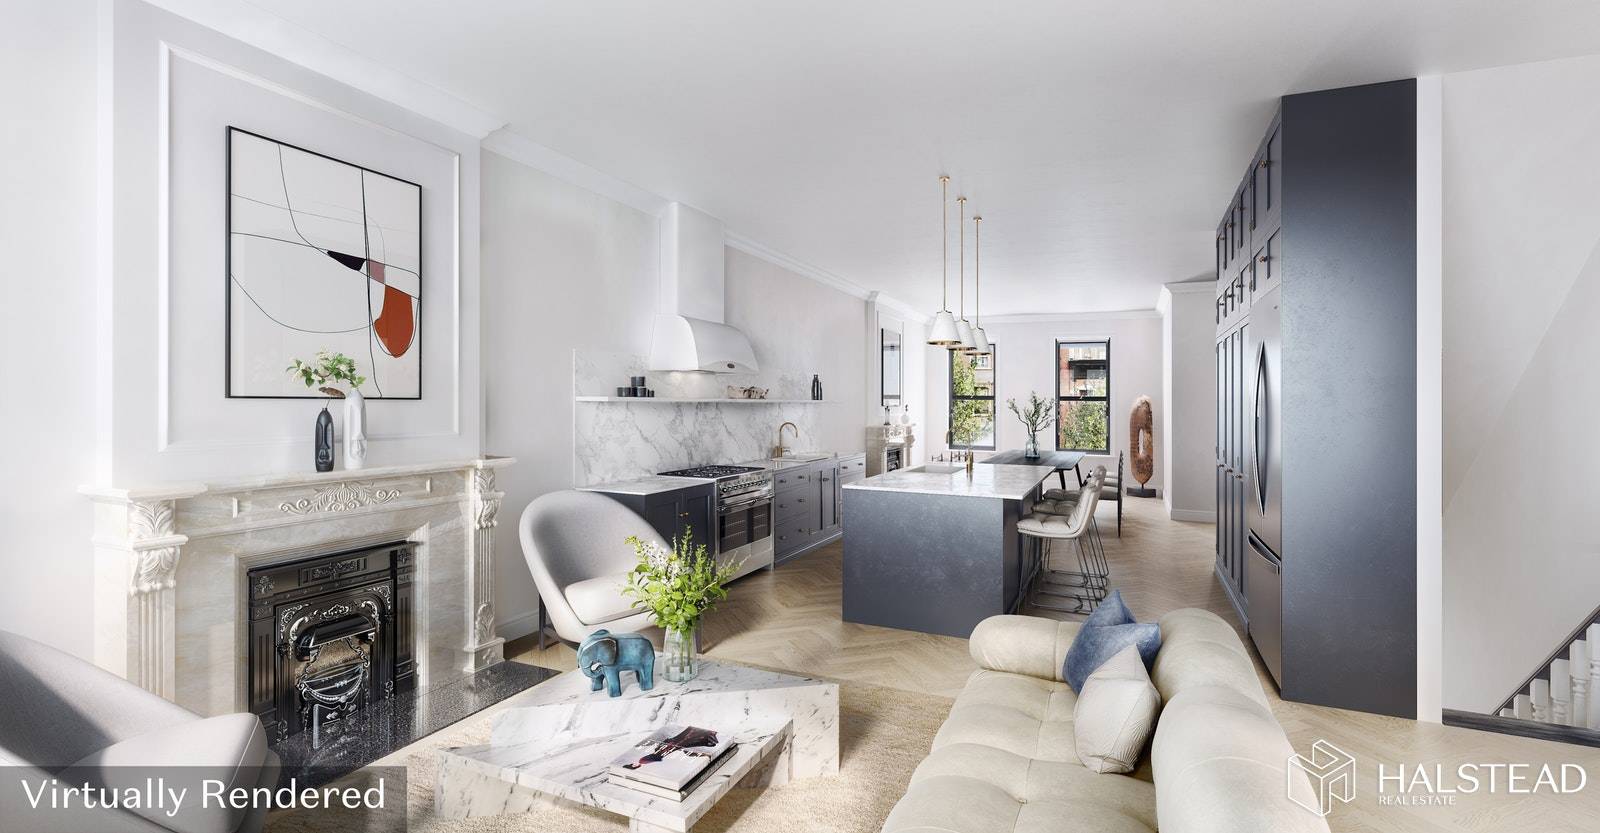 Located in Gramercy Park on a gorgeous townhouse block around the corner from Stuyvesant Square Park, 325 East 18th Street presents a blank canvas and unique opportunity to customize your ...